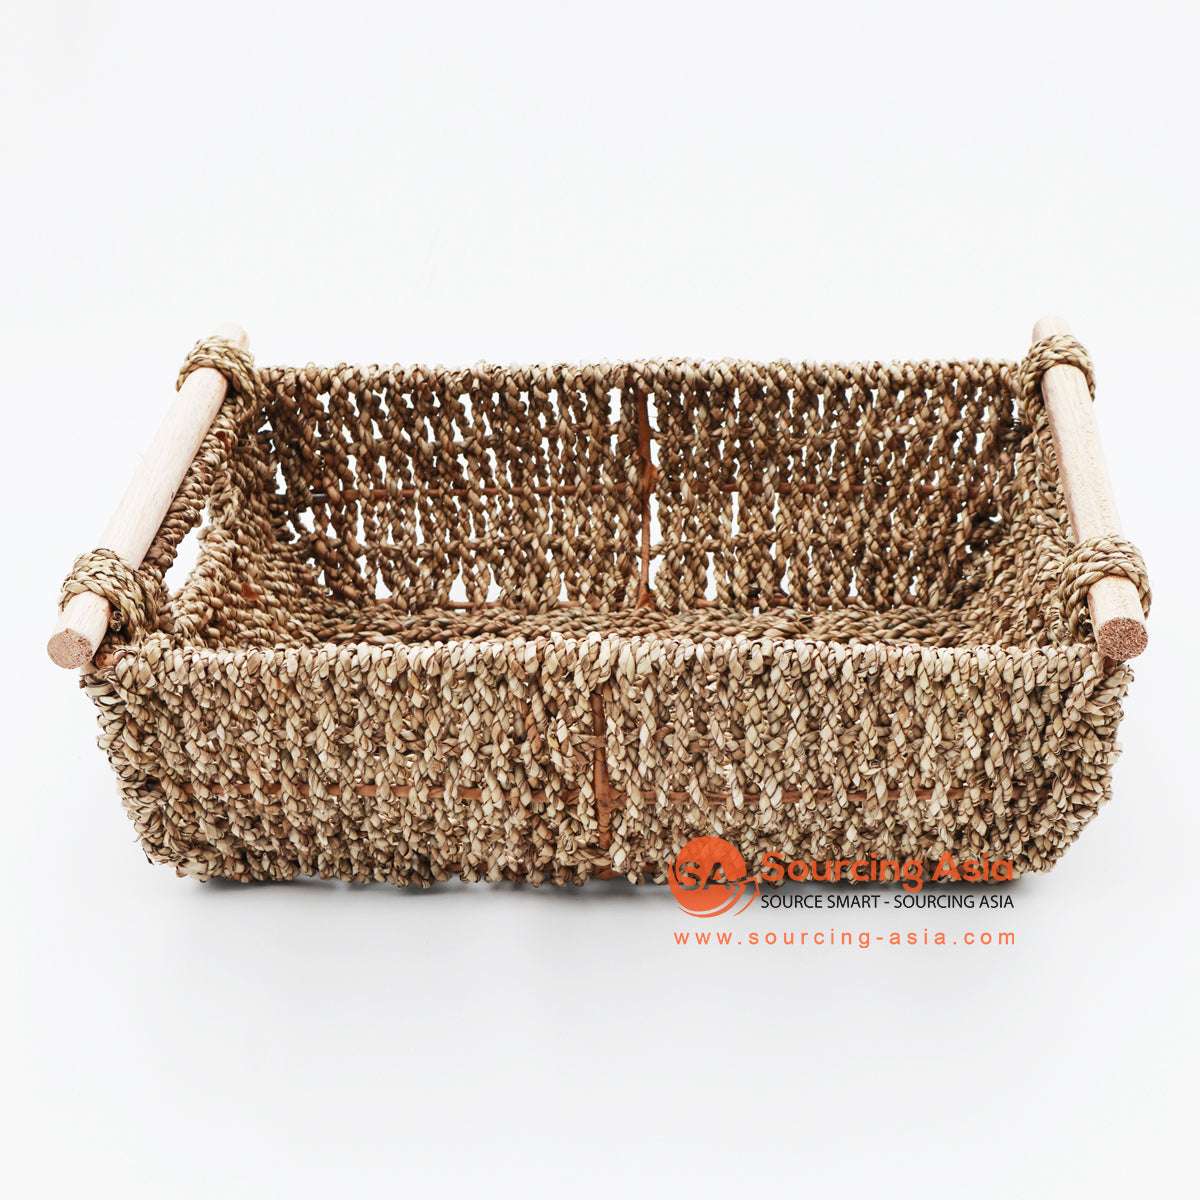 HBS170 NATURAL WOVEN SEAGRASS TOWEL BASKET